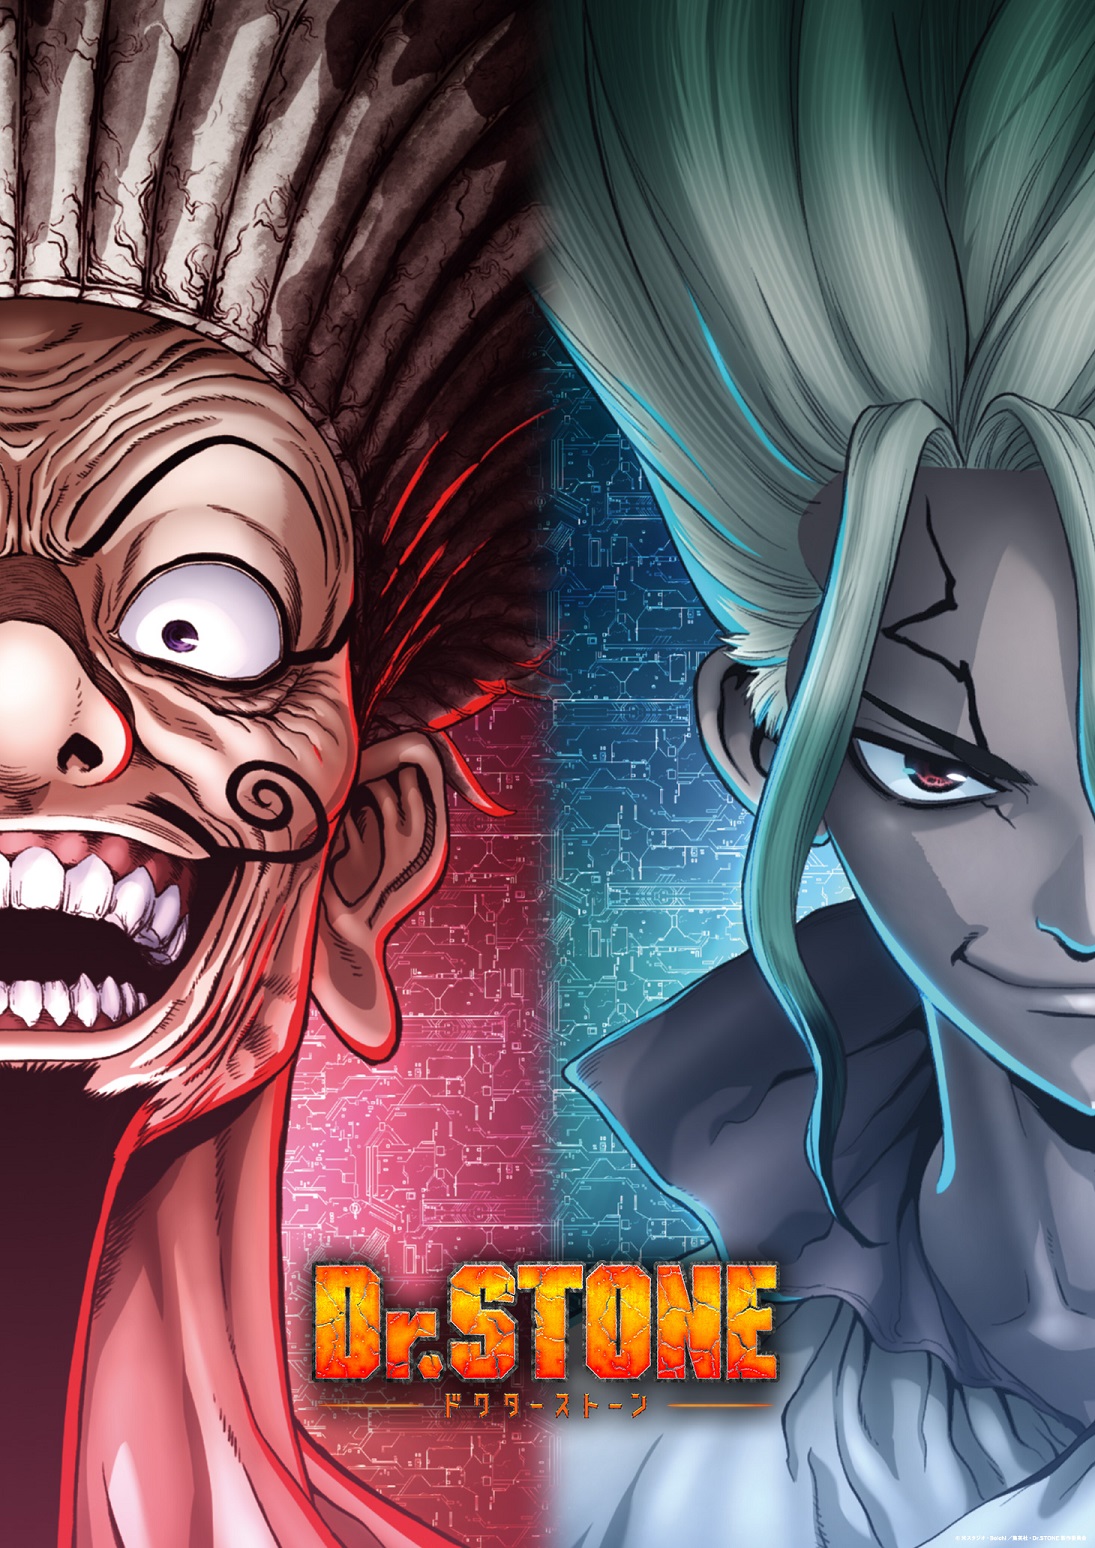 Dr.STONE 第3期 第2 クール